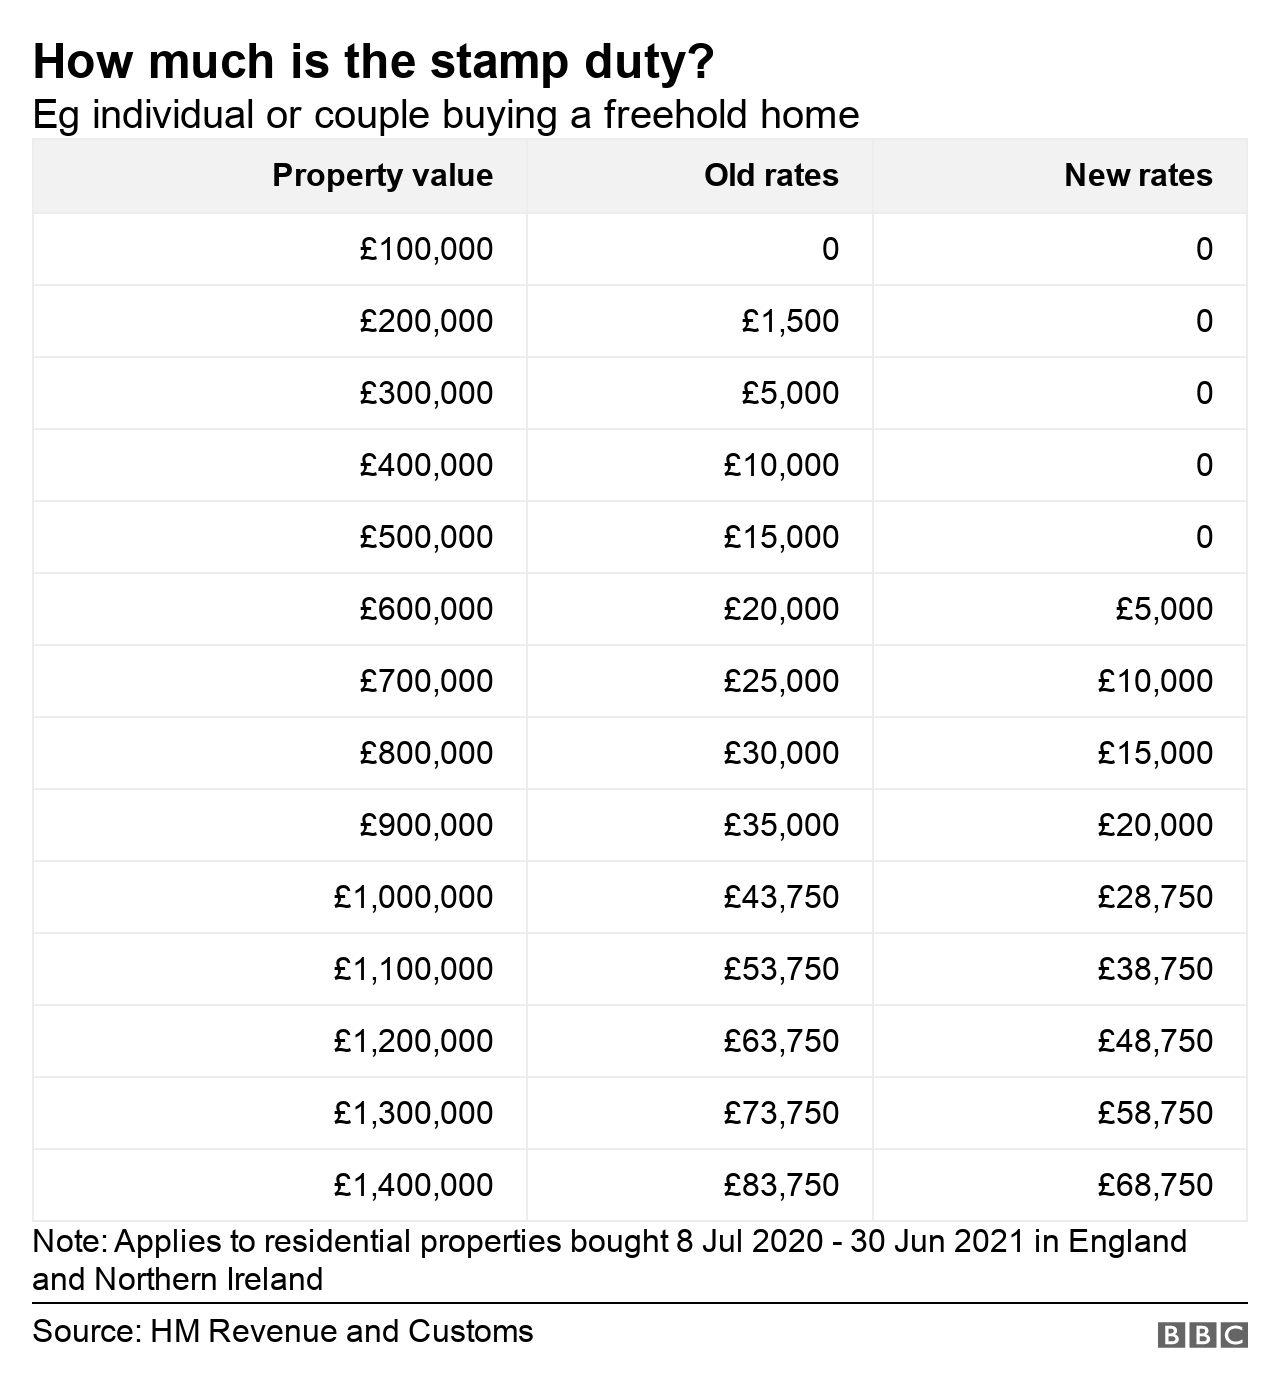 Table of stamp duty rates